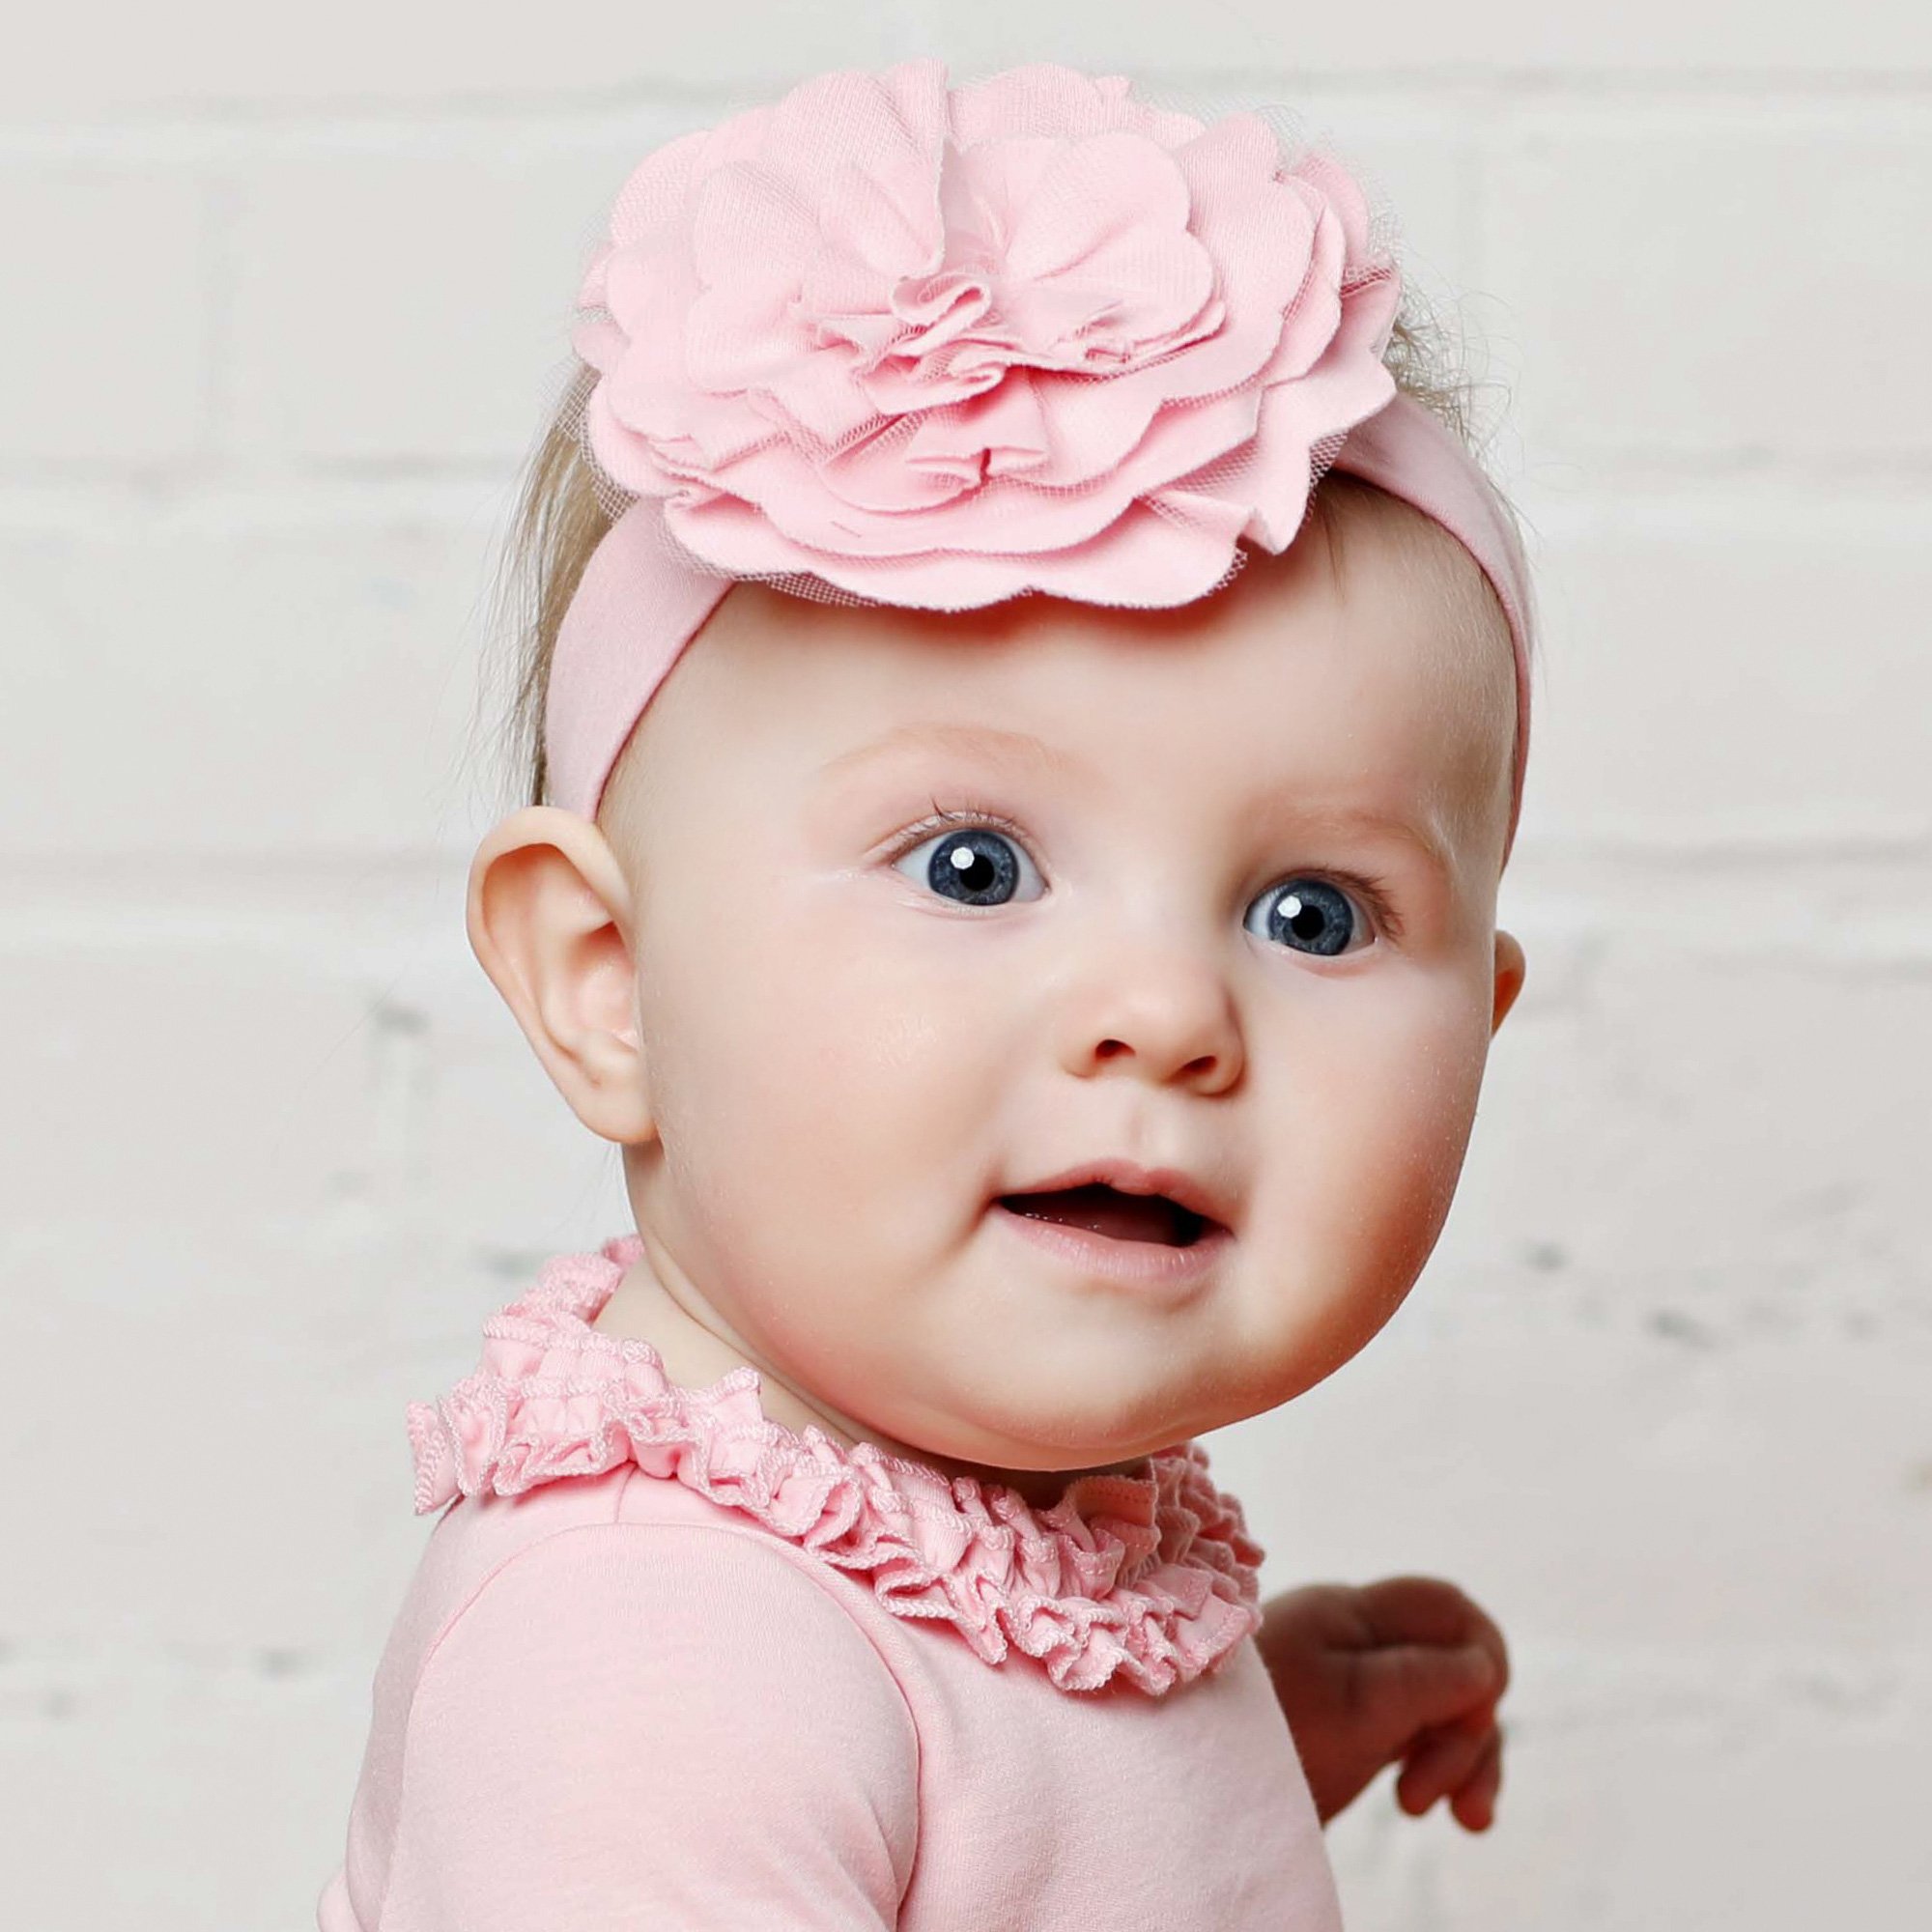 Lemon Loves Layette Lily Pad Headband for Baby Girls in Pink